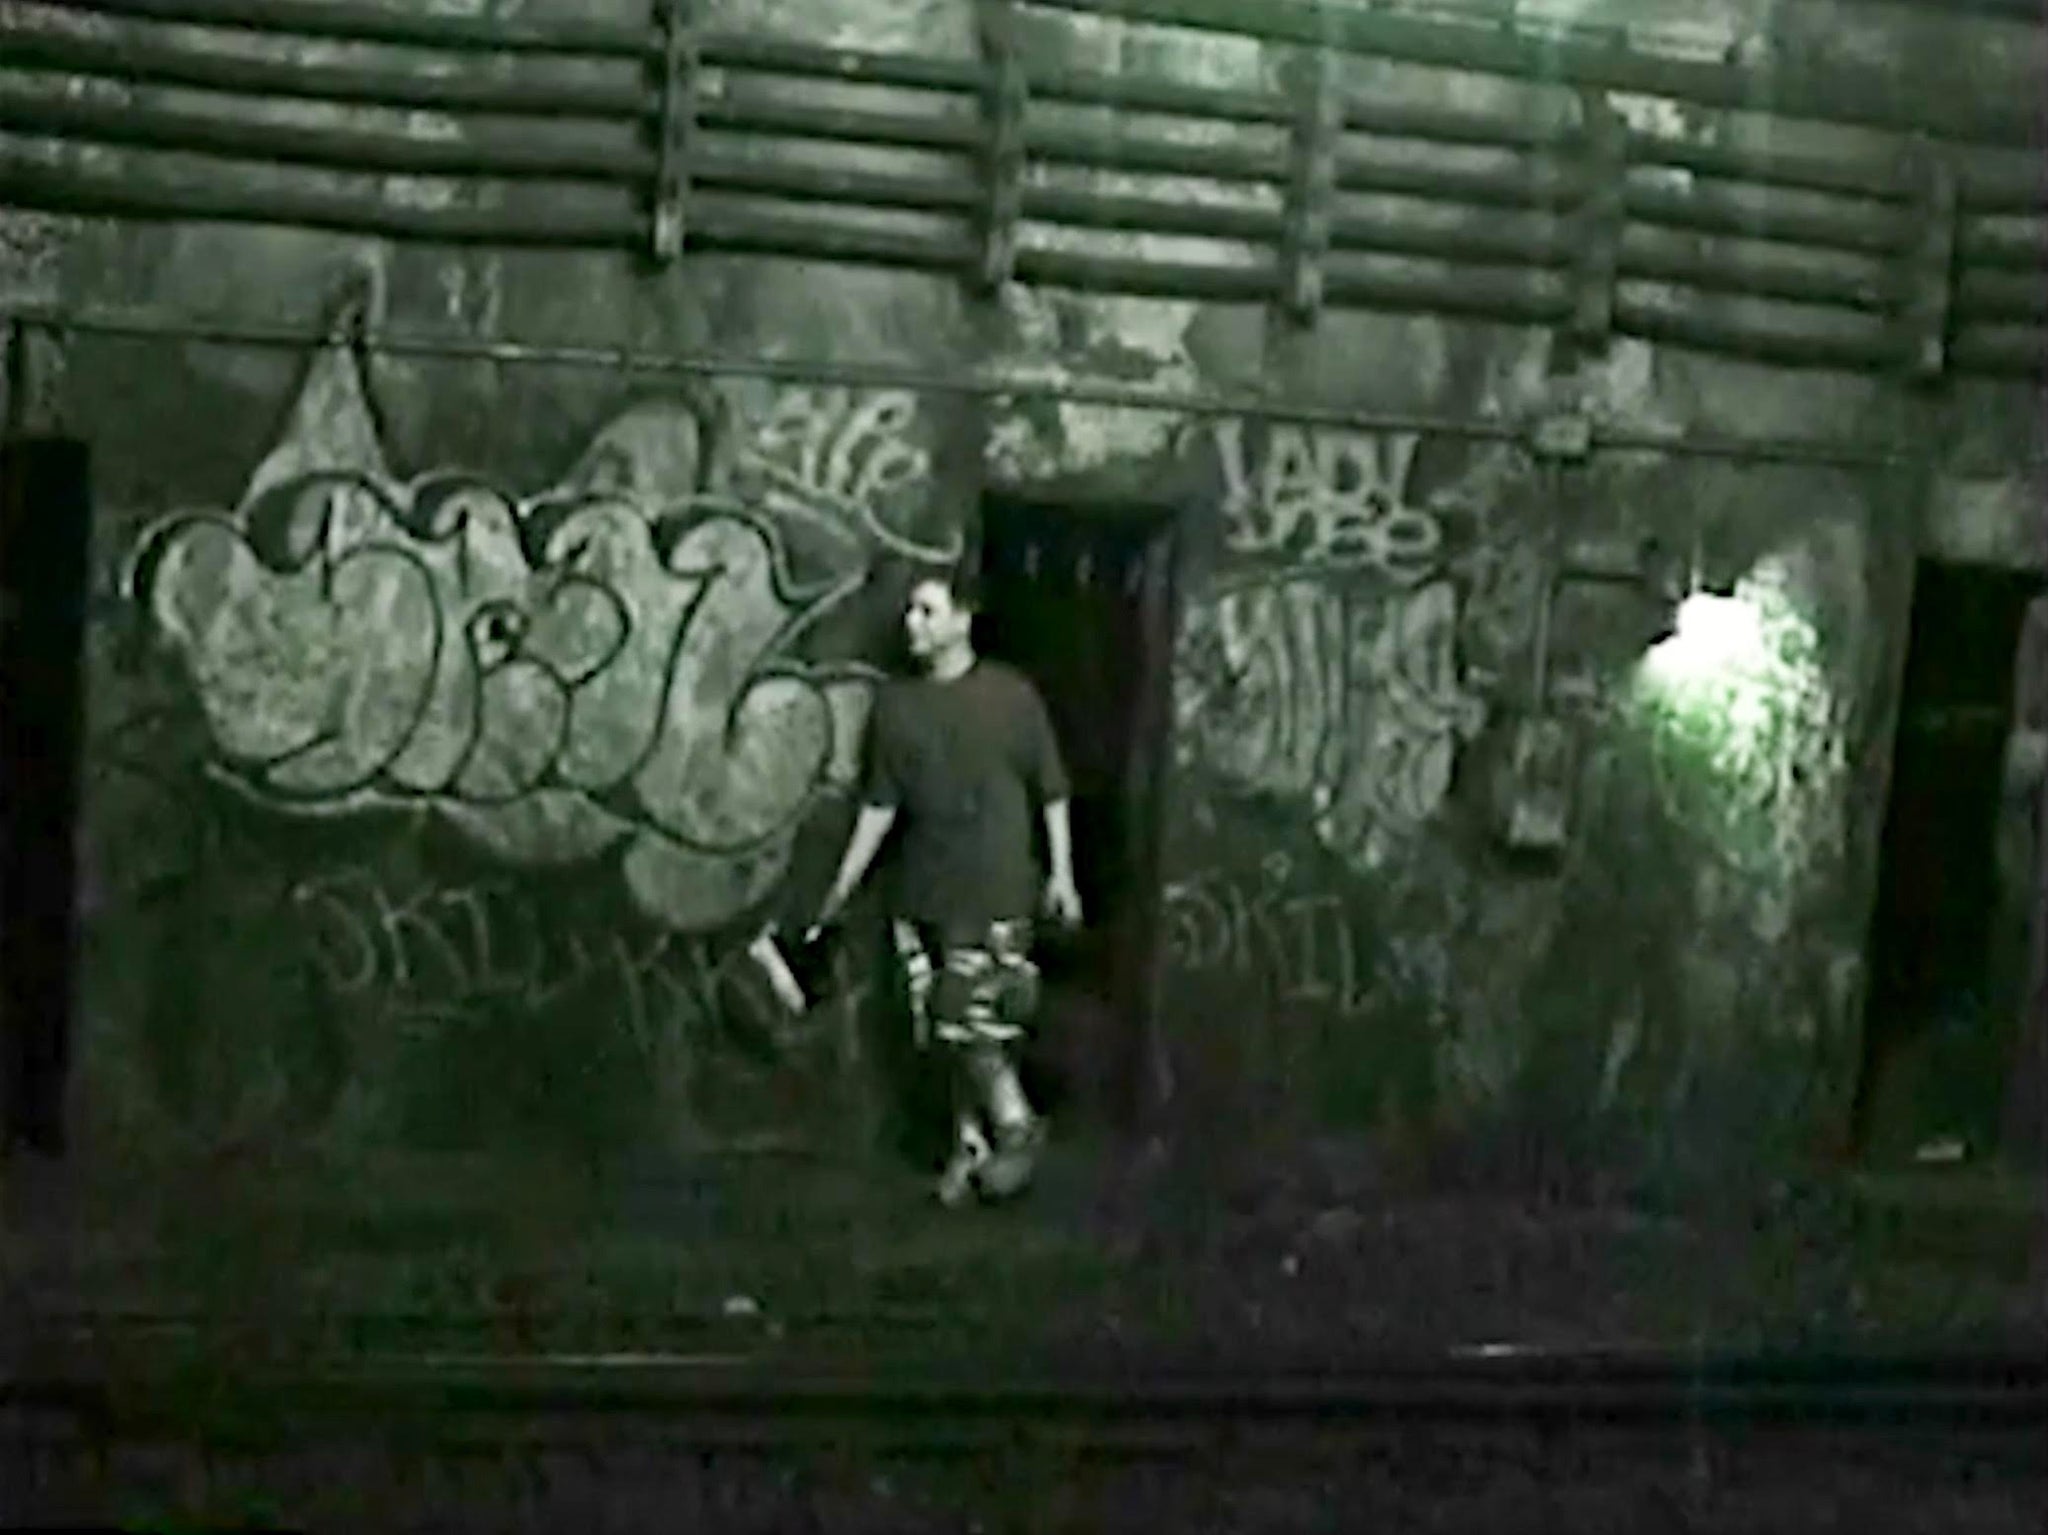 Pablo Power and Lee Smith, "Sounds and Shifts: Video Collaboration of archival footage from Lee Smith skating along with Pablo Power graffiti making"